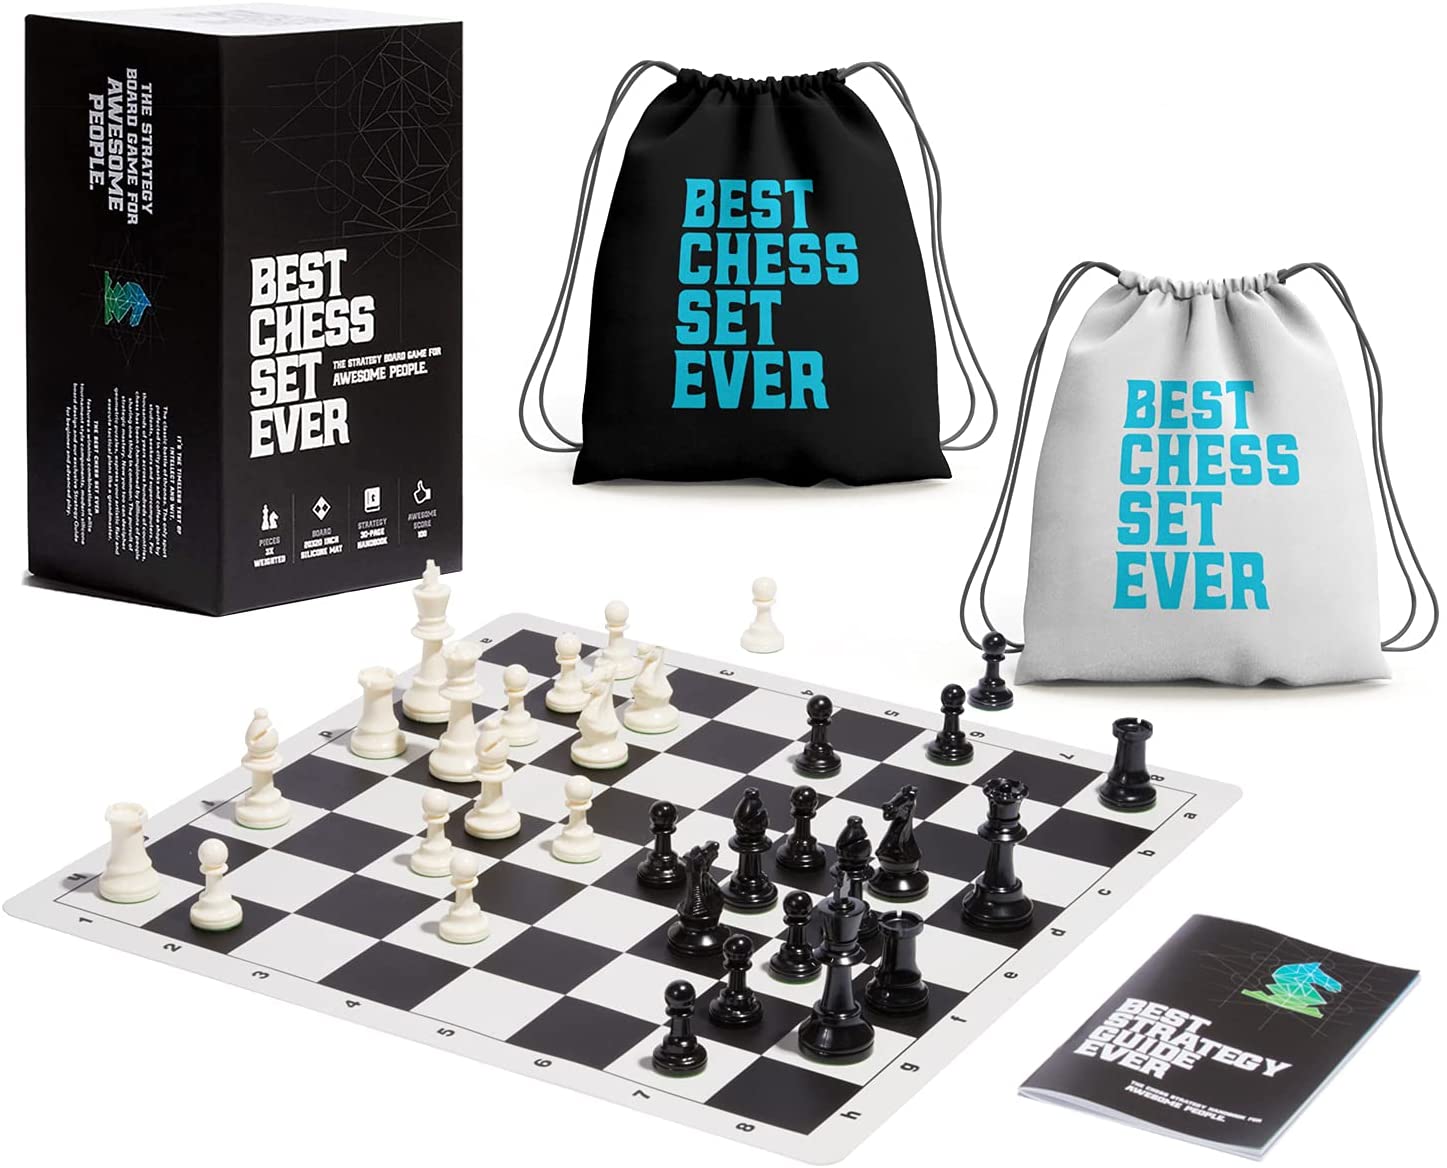 Picture of the board and bags from Best Chess Set Ever - Triple Weight